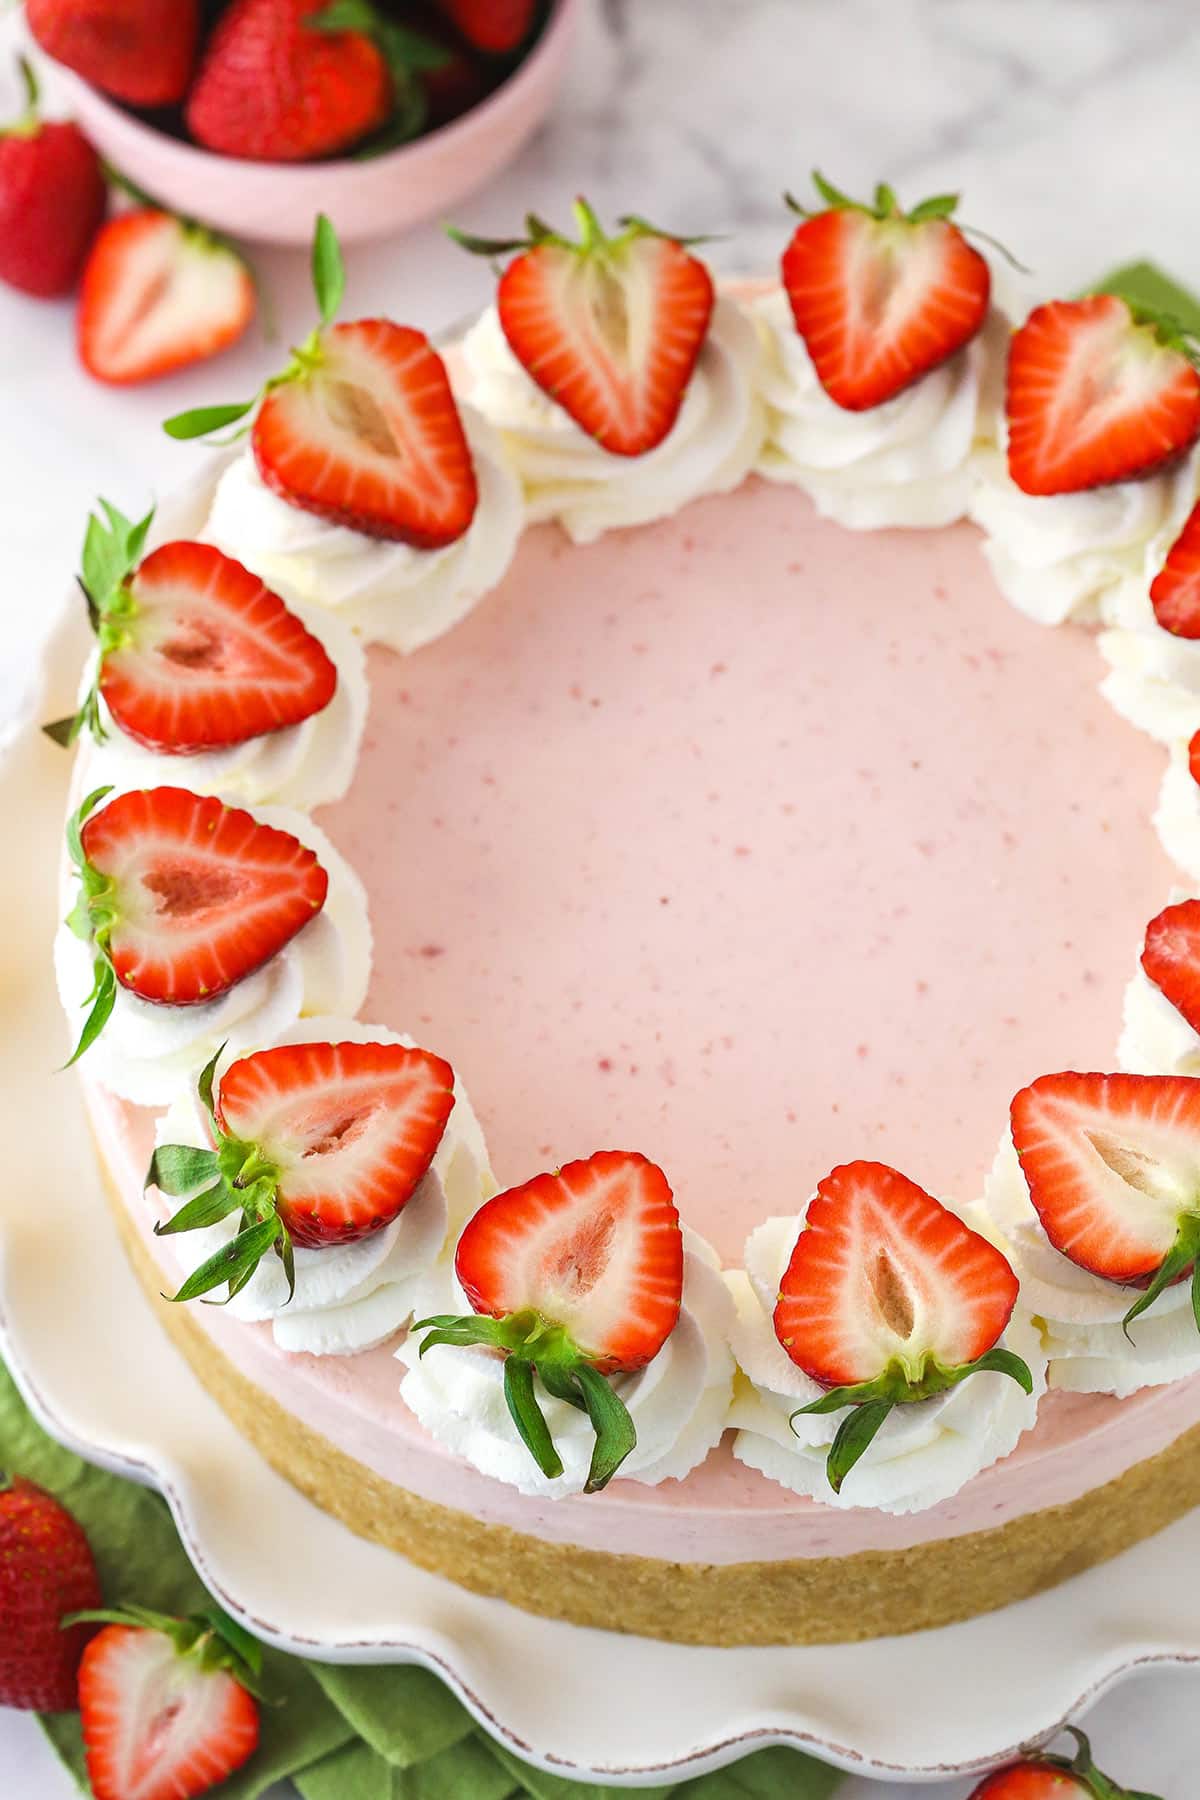 Overhead of a no back strawberry cheesecake on a serving platter near fresh strawberries.